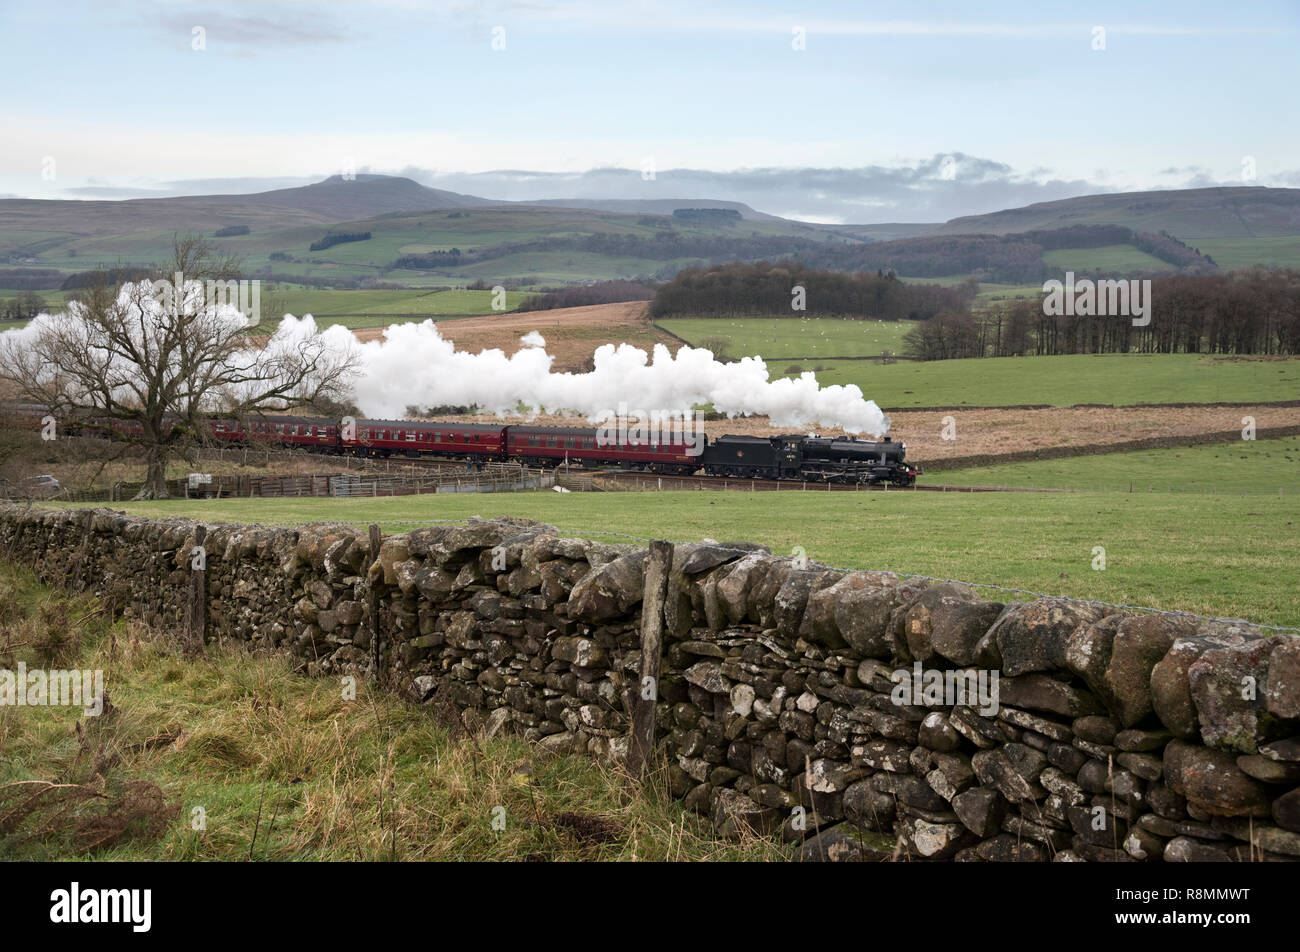 Clapham Moor, North Yorkshire, UK. 16th Dec 2018. Santa Special steam train from Lancaster to Carnforth via Hellifield. Seen here at Clapham Moor near Settle, North Yorkshire. Ingleborough peak in on the horizon. The locomotive is a 1940s Stanier 8F. Credit: John Bentley/Alamy Live News Stock Photo